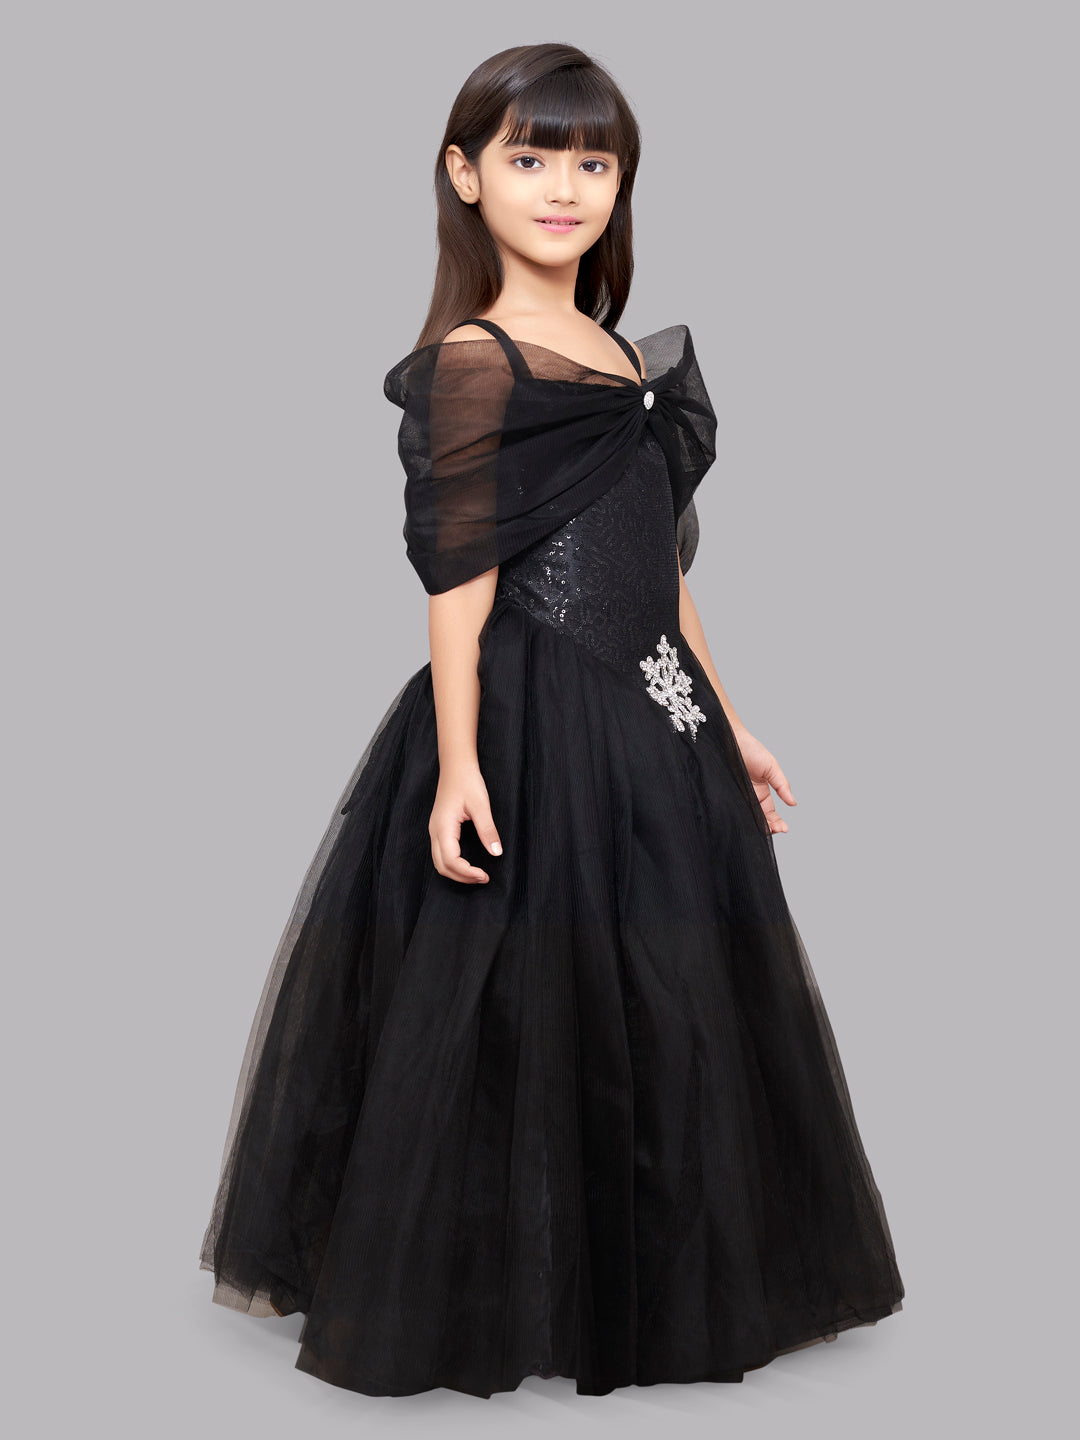 Amazon.com: LOVELIULIU66 Colorful Embroidered Mini Quinceanera Dresses  Toddler Off Shoulder Satin Party Dress Kids Black 2: Clothing, Shoes &  Jewelry